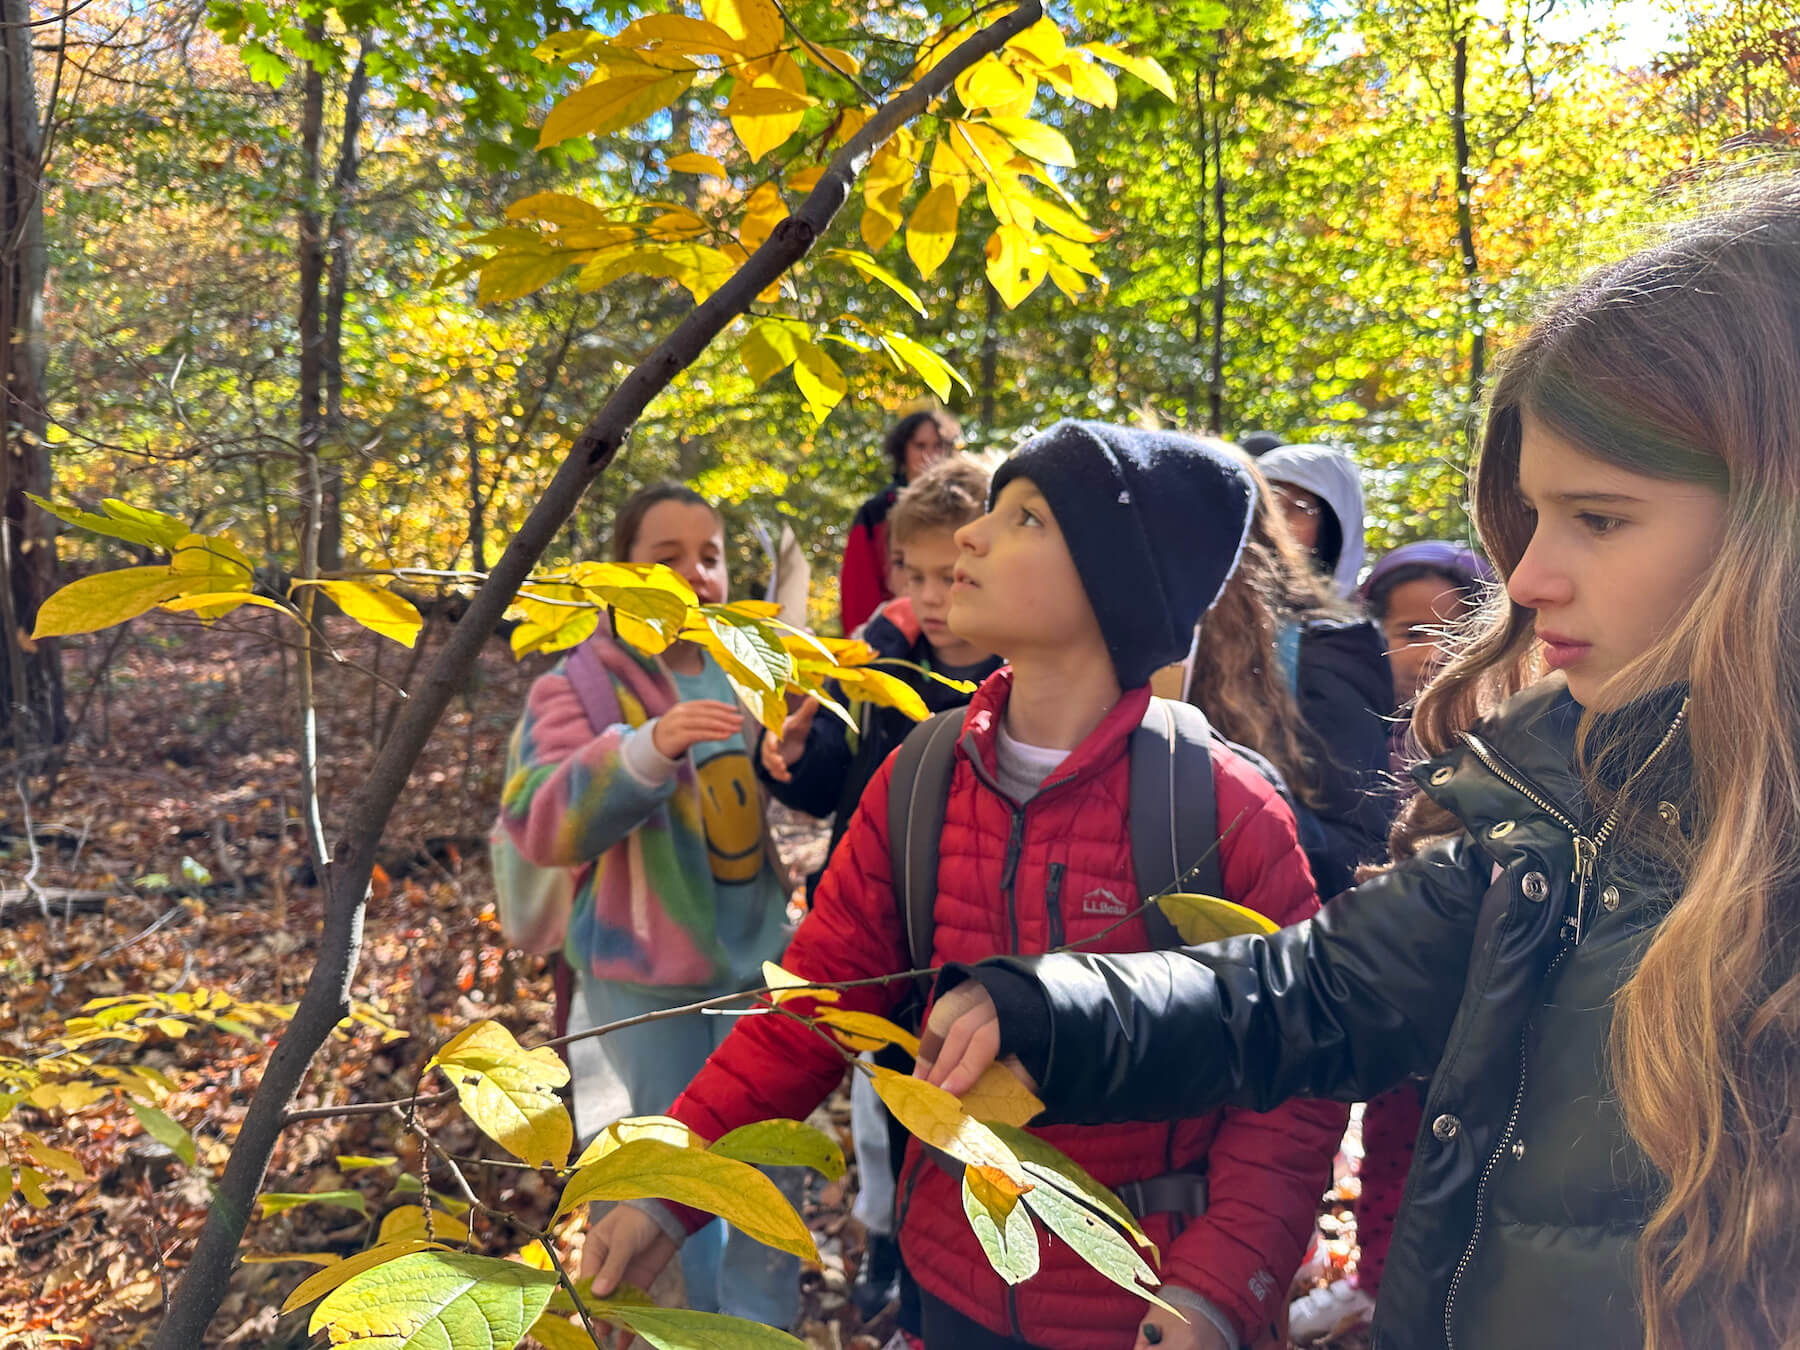 Ethical Culture Fieldston School_Feel Good Photos_Fieldston Lower 3rd Grade class learning about trees during a field trip to NYBG